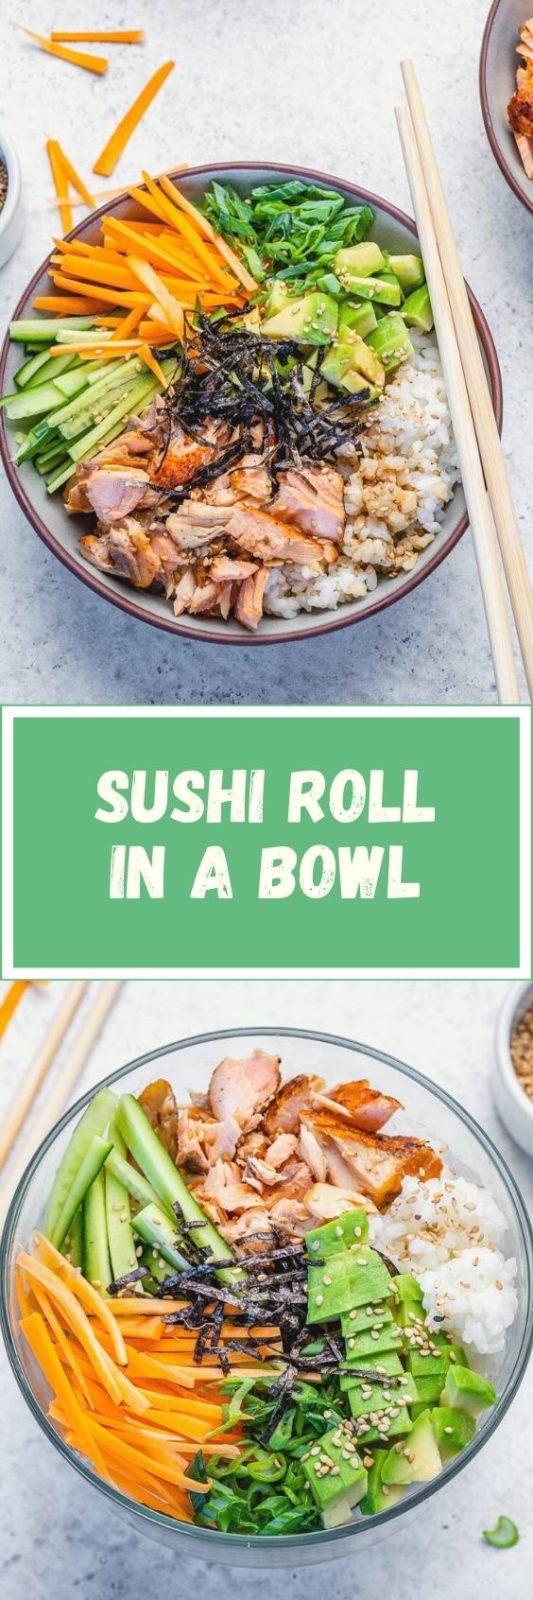 [VIDEO] Sushi Roll in a Bowl | Clean Food Crush